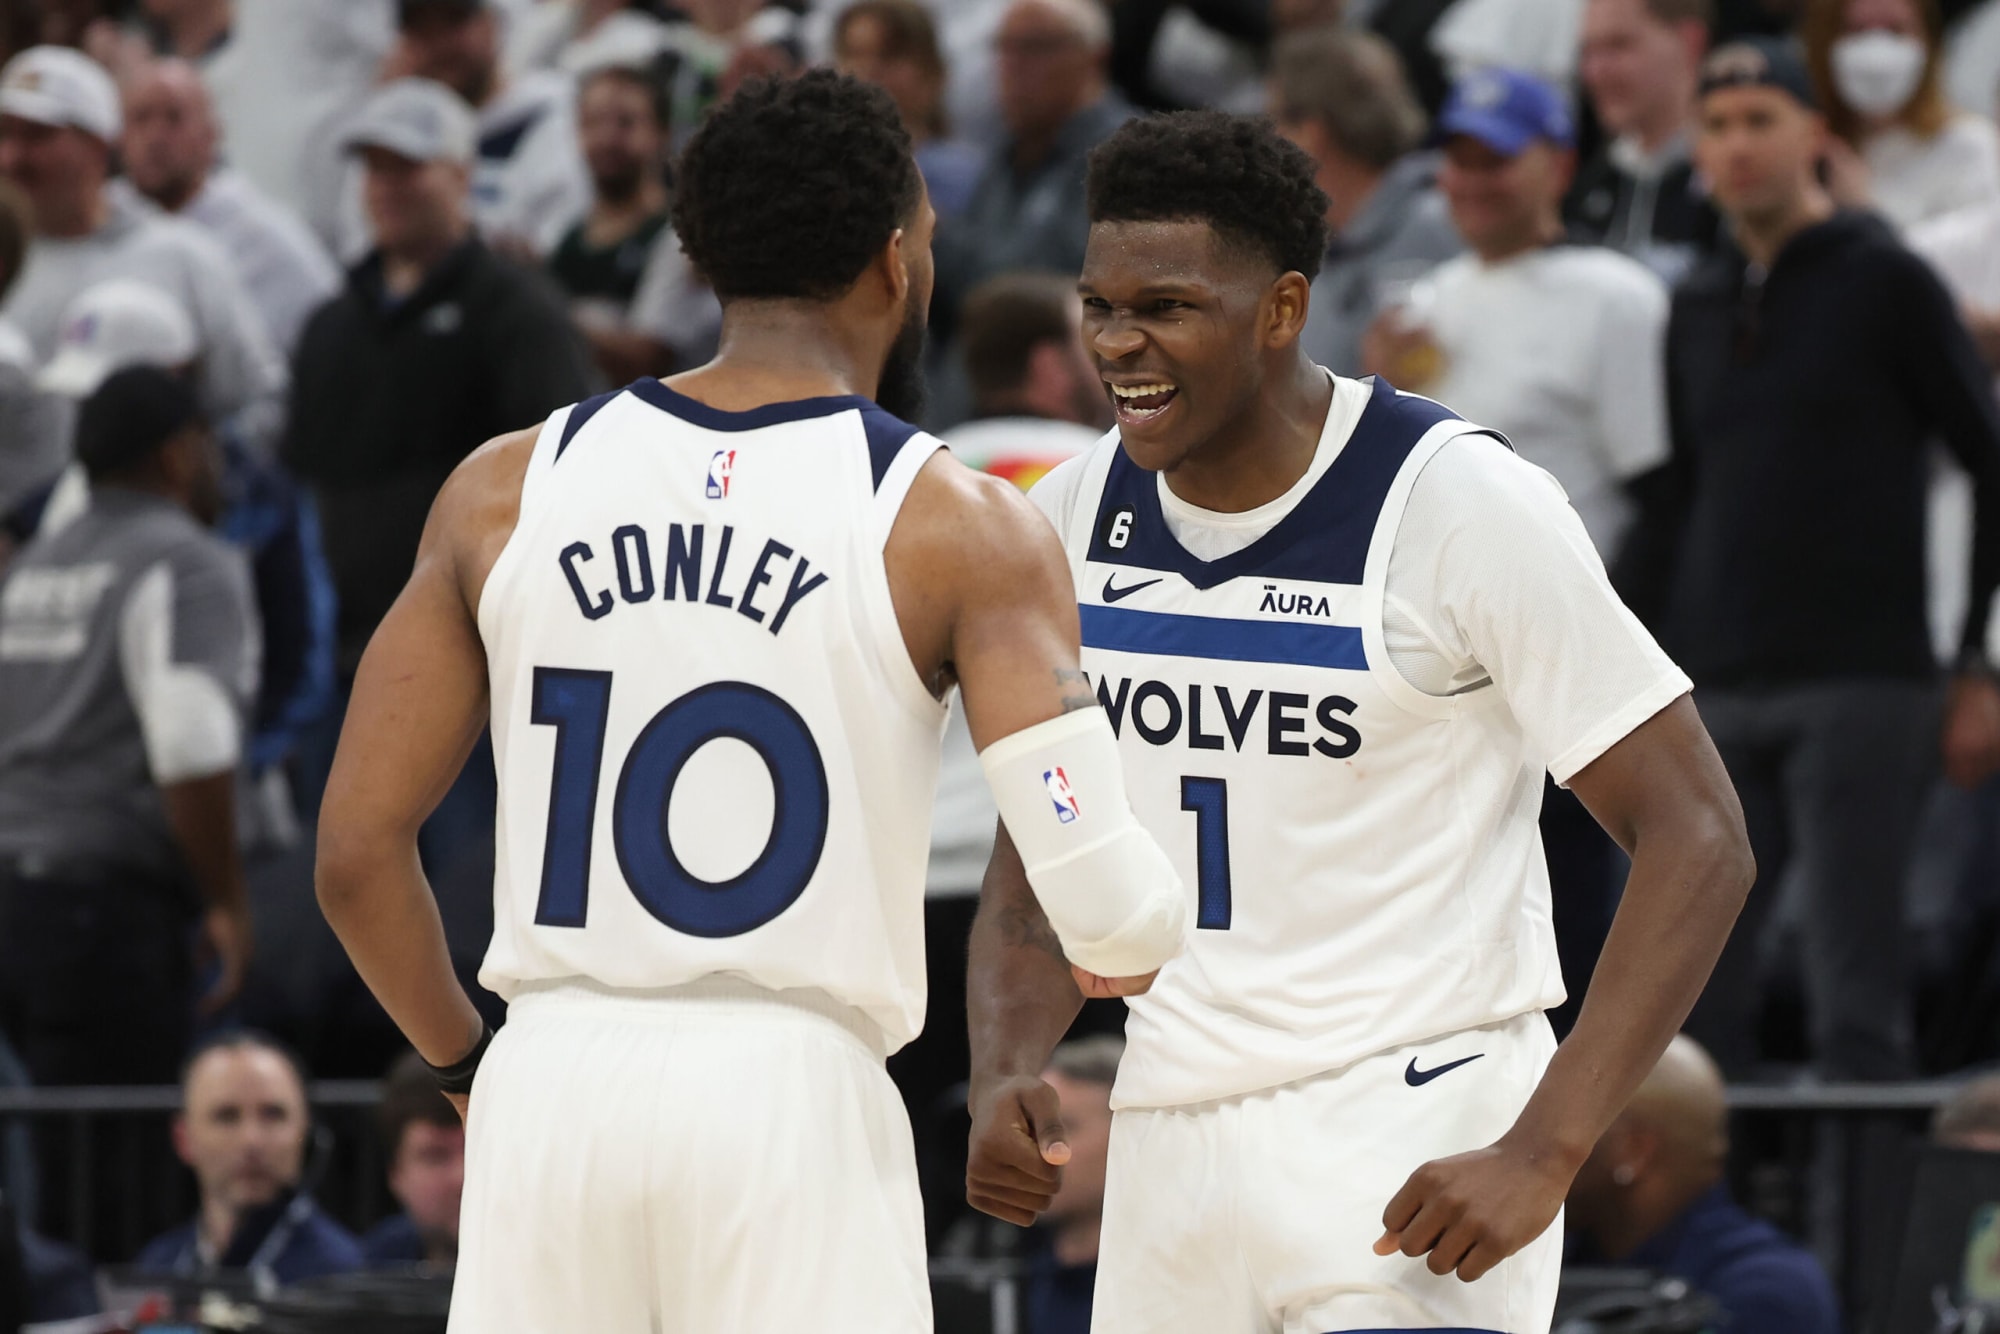 2023-24 Projected Starting Lineup For Minnesota Timberwolves